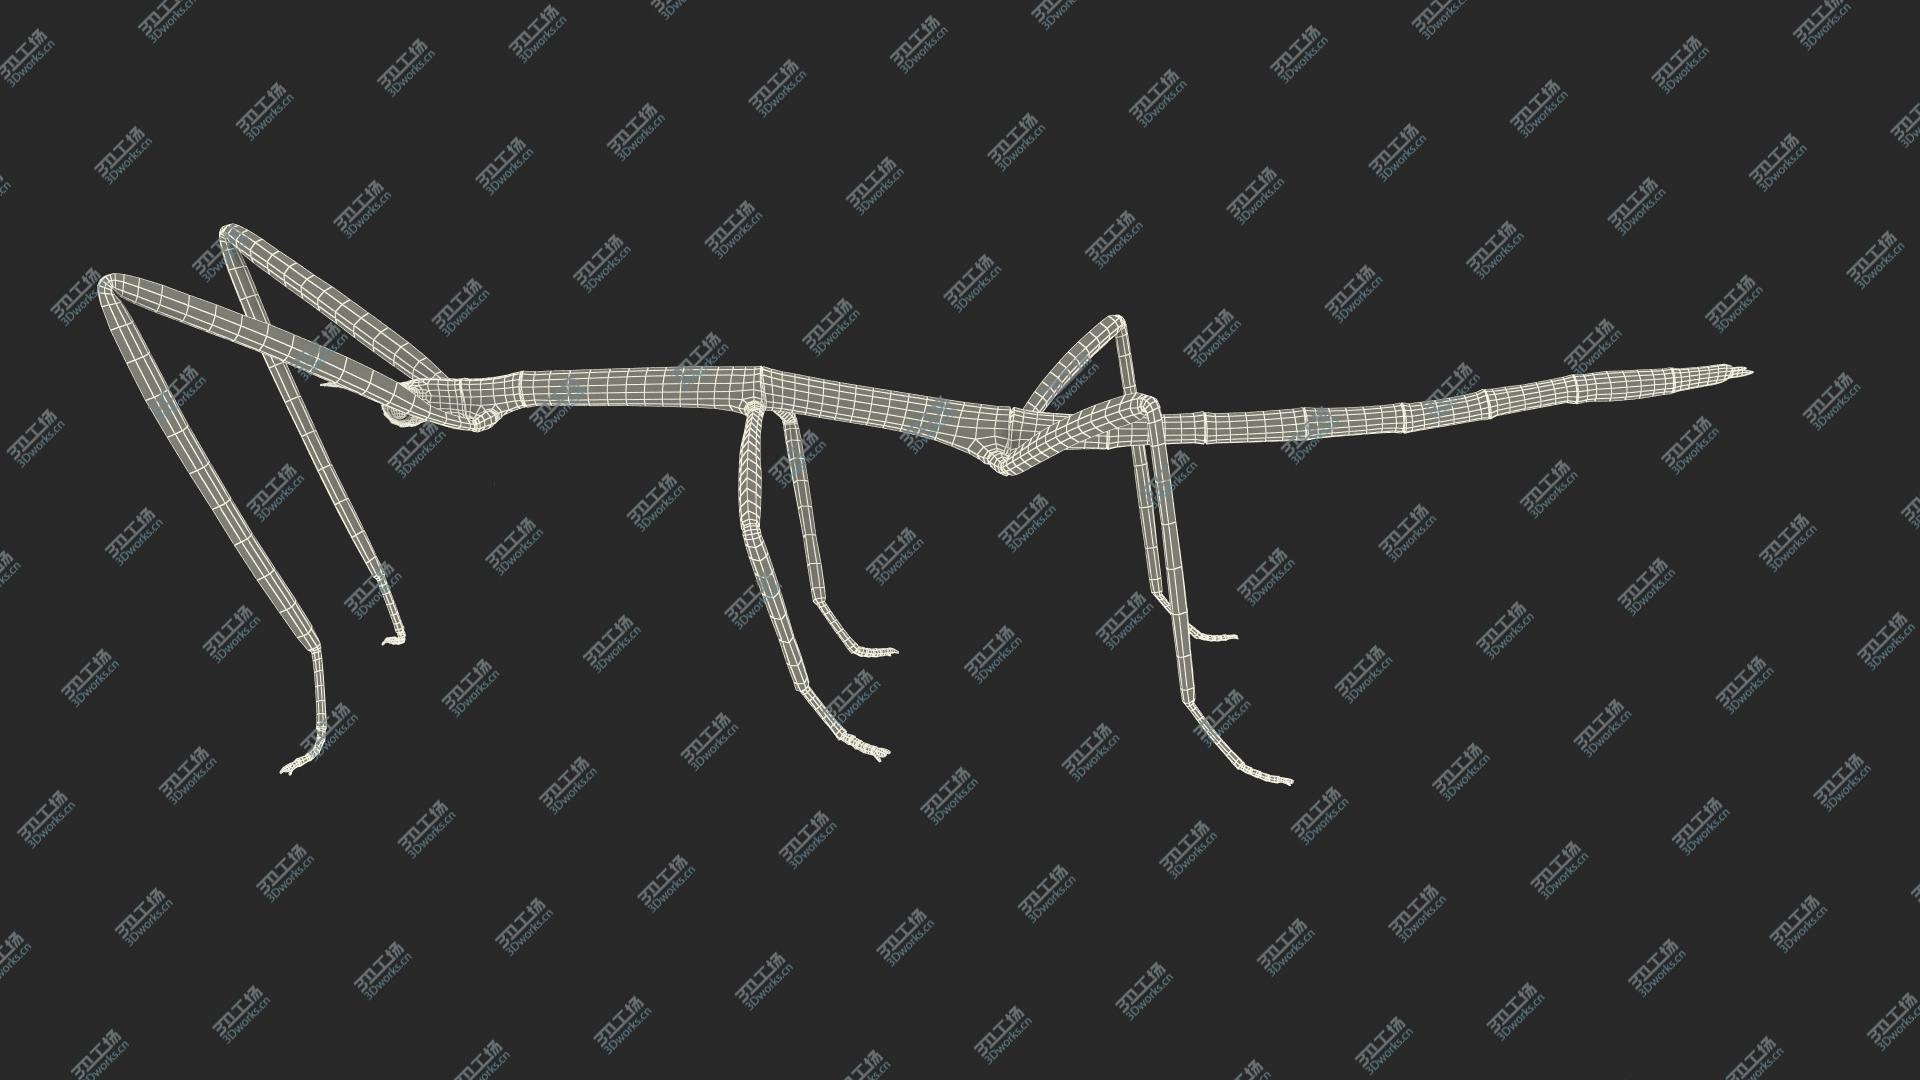 images/goods_img/202105071/Stick Insect Green Rigged 3D model/5.jpg